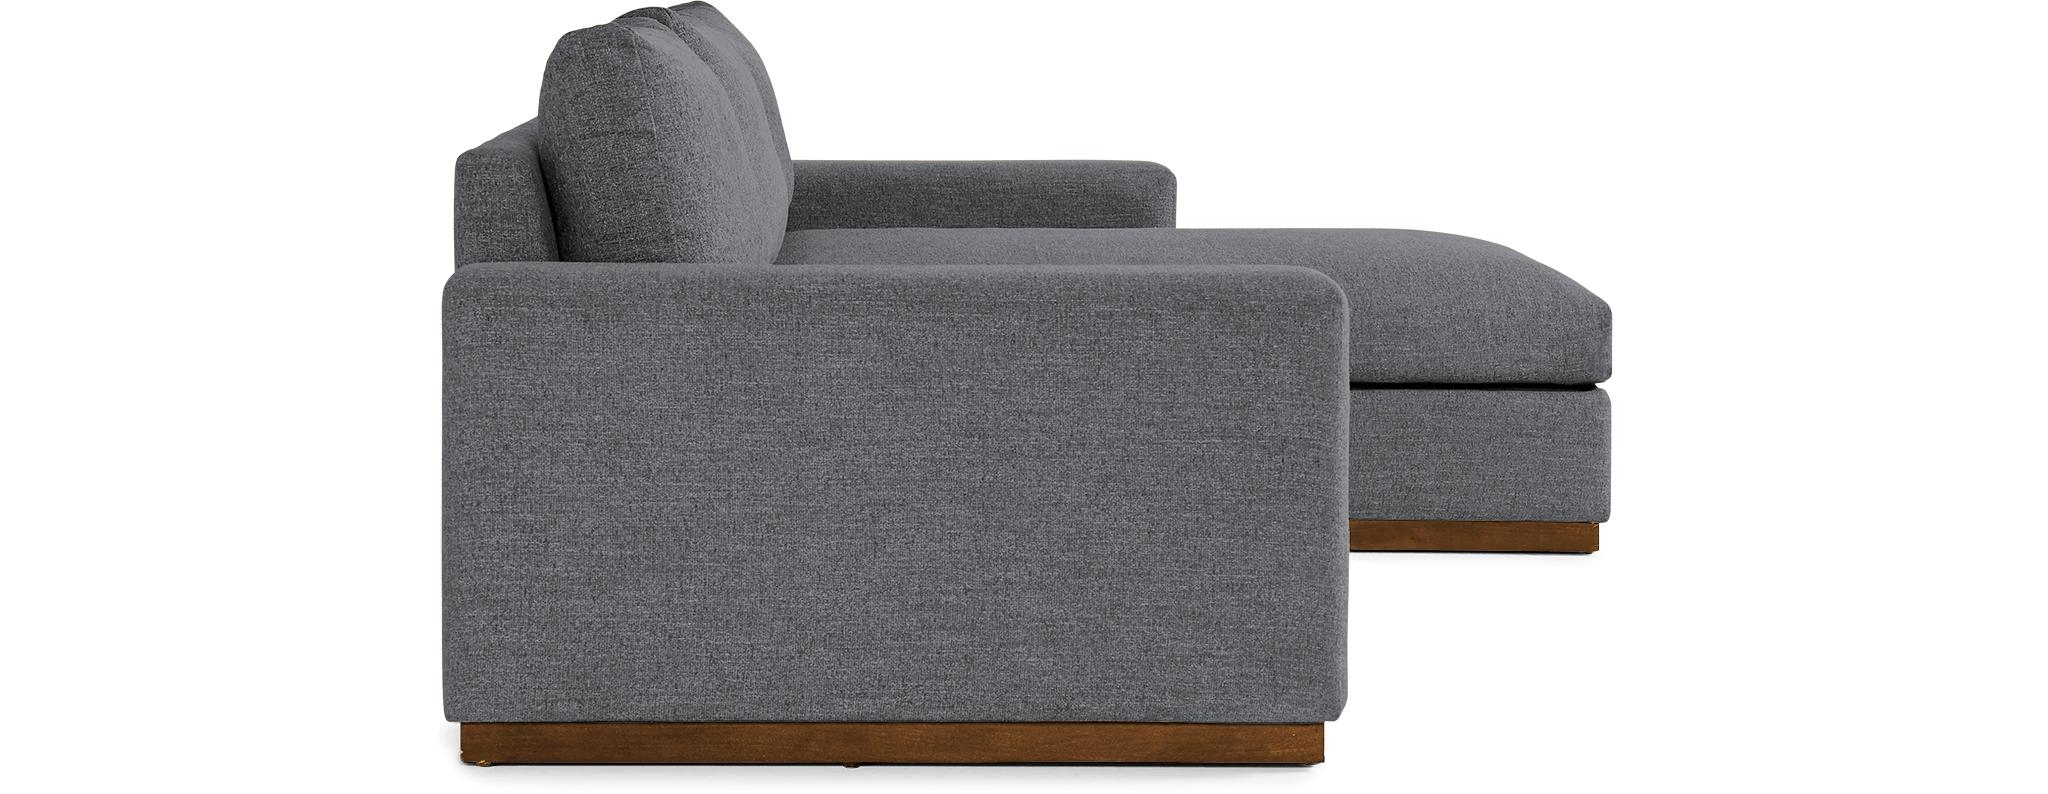 Gray Holt Mid Century Modern Sectional with Storage - Essence Ash - Mocha - Right - Image 2